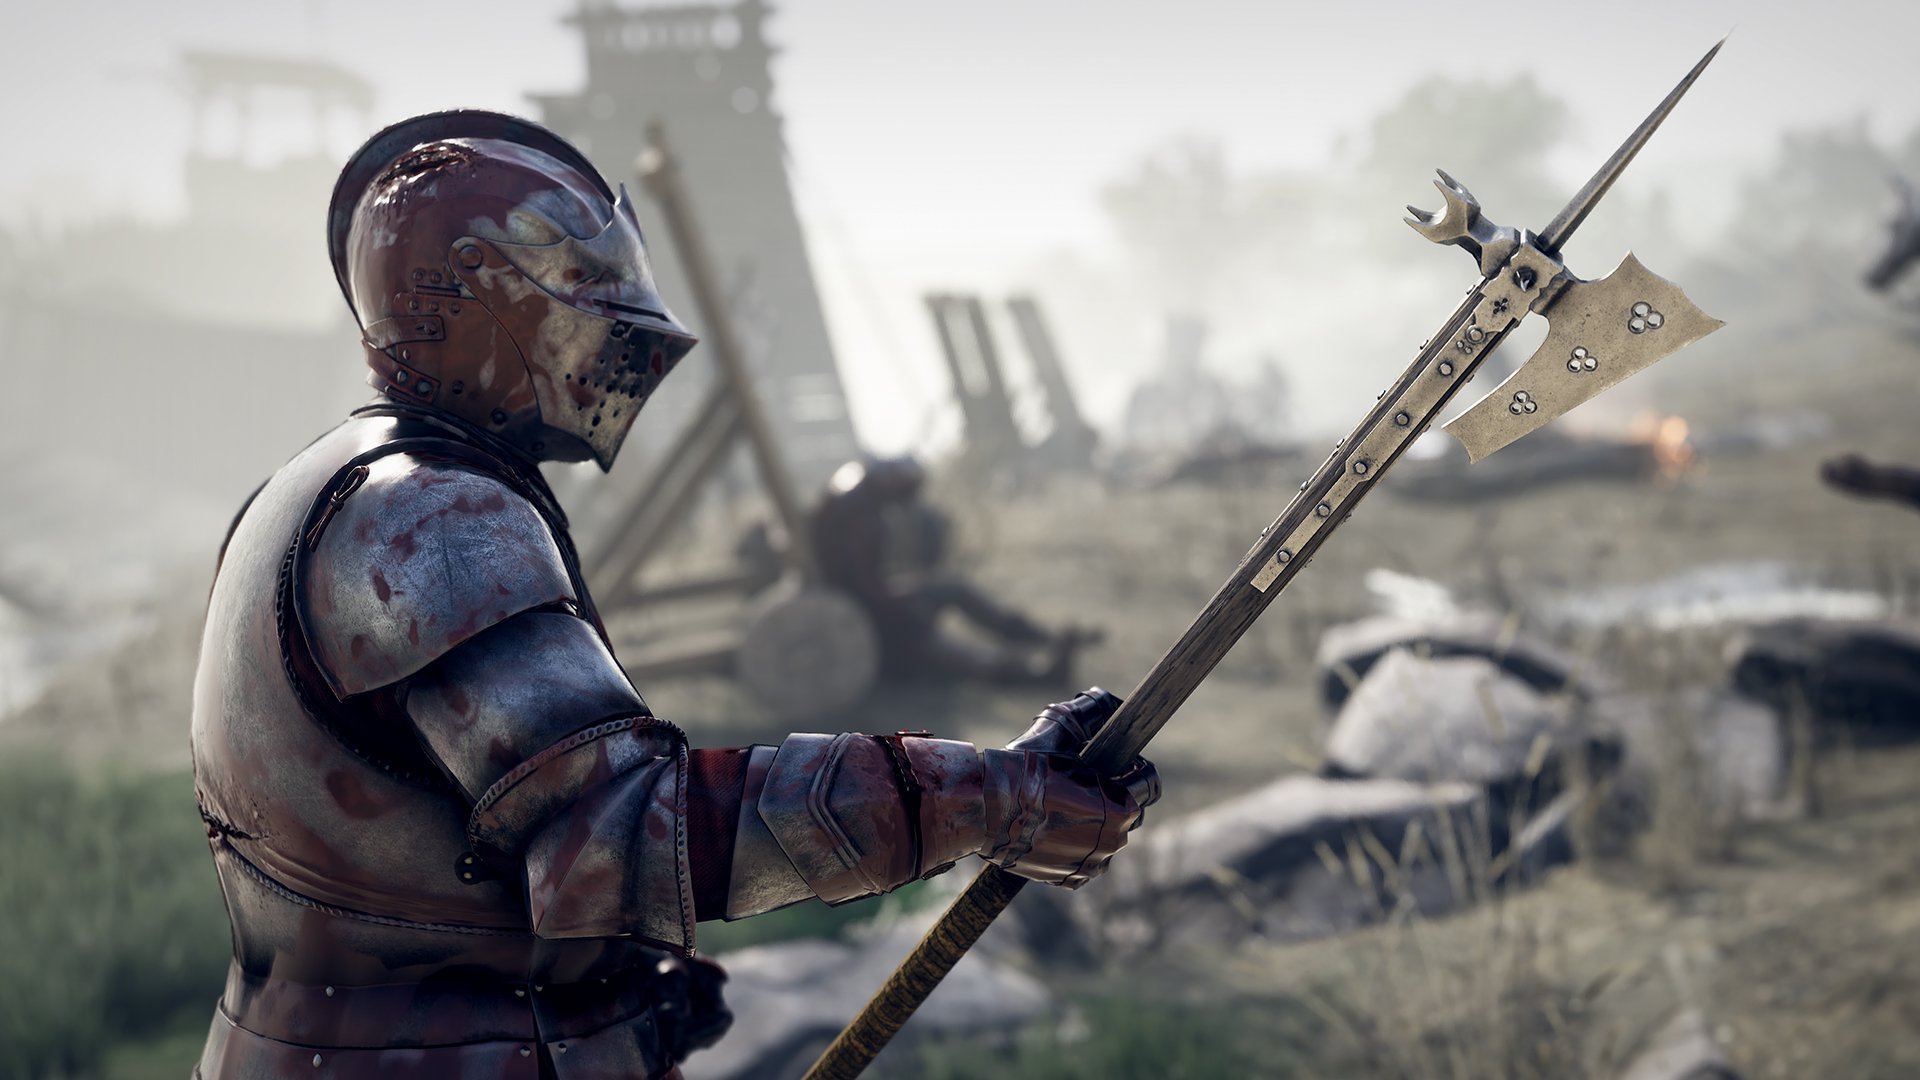 Mordhau, 'medieval slasher' with battle royale mode out now on PC, Twitch by storm Destructoid